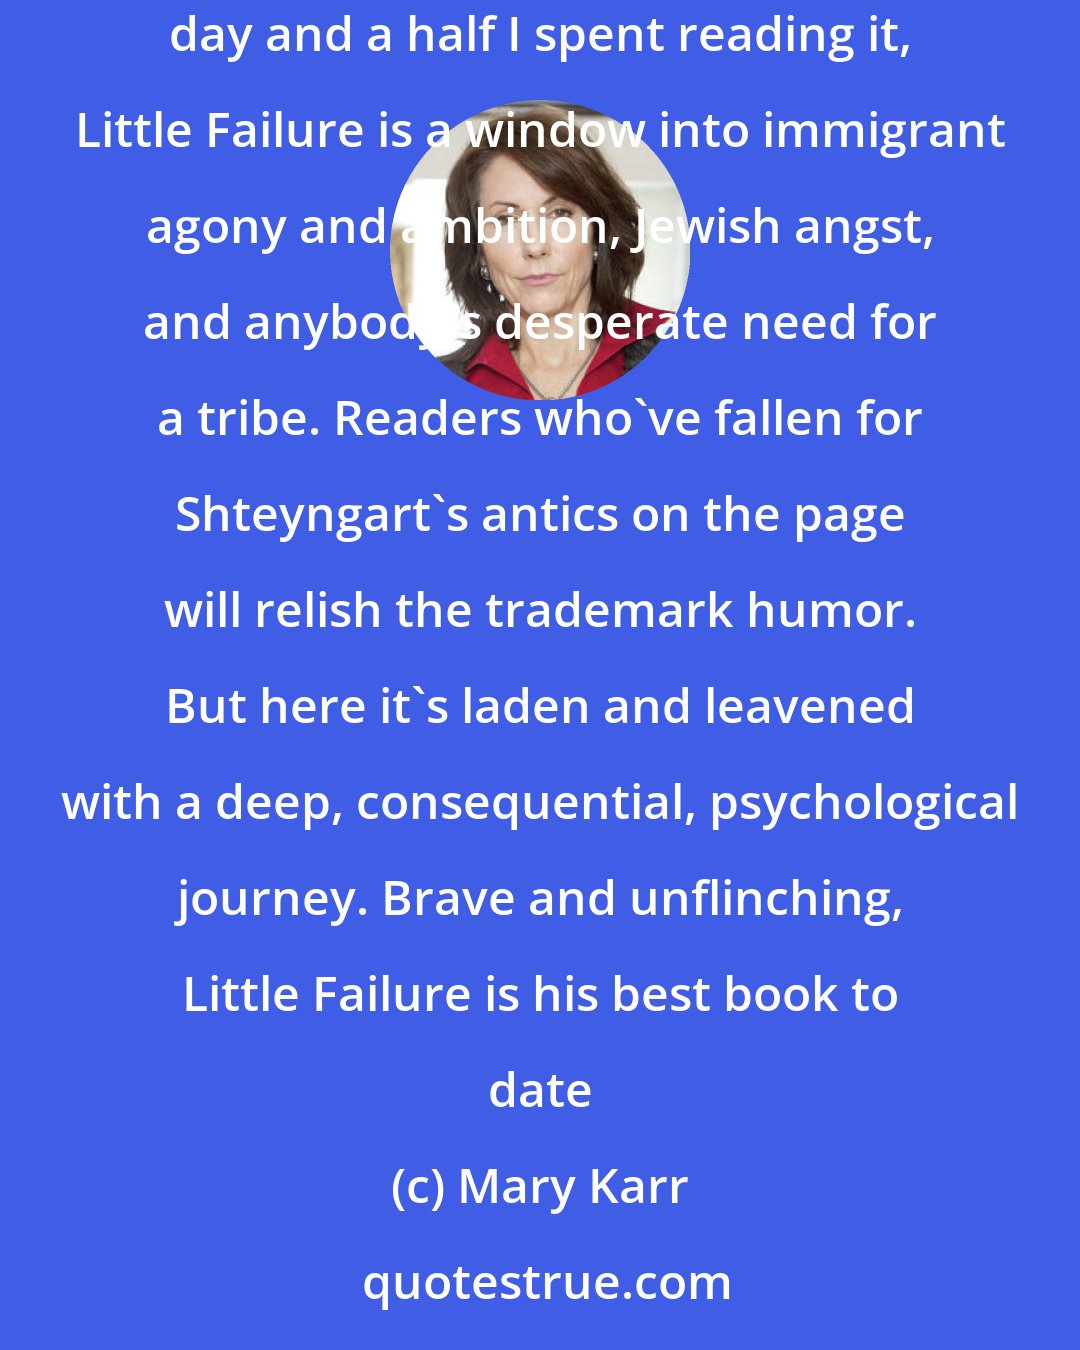 Mary Karr: Gary Shteyngart has written a memoir for the ages. I spat laughter on the first page and closed the last with wet eyes. Un-put-down-able in the day and a half I spent reading it, Little Failure is a window into immigrant agony and ambition, Jewish angst, and anybody's desperate need for a tribe. Readers who've fallen for Shteyngart's antics on the page will relish the trademark humor. But here it's laden and leavened with a deep, consequential, psychological journey. Brave and unflinching, Little Failure is his best book to date